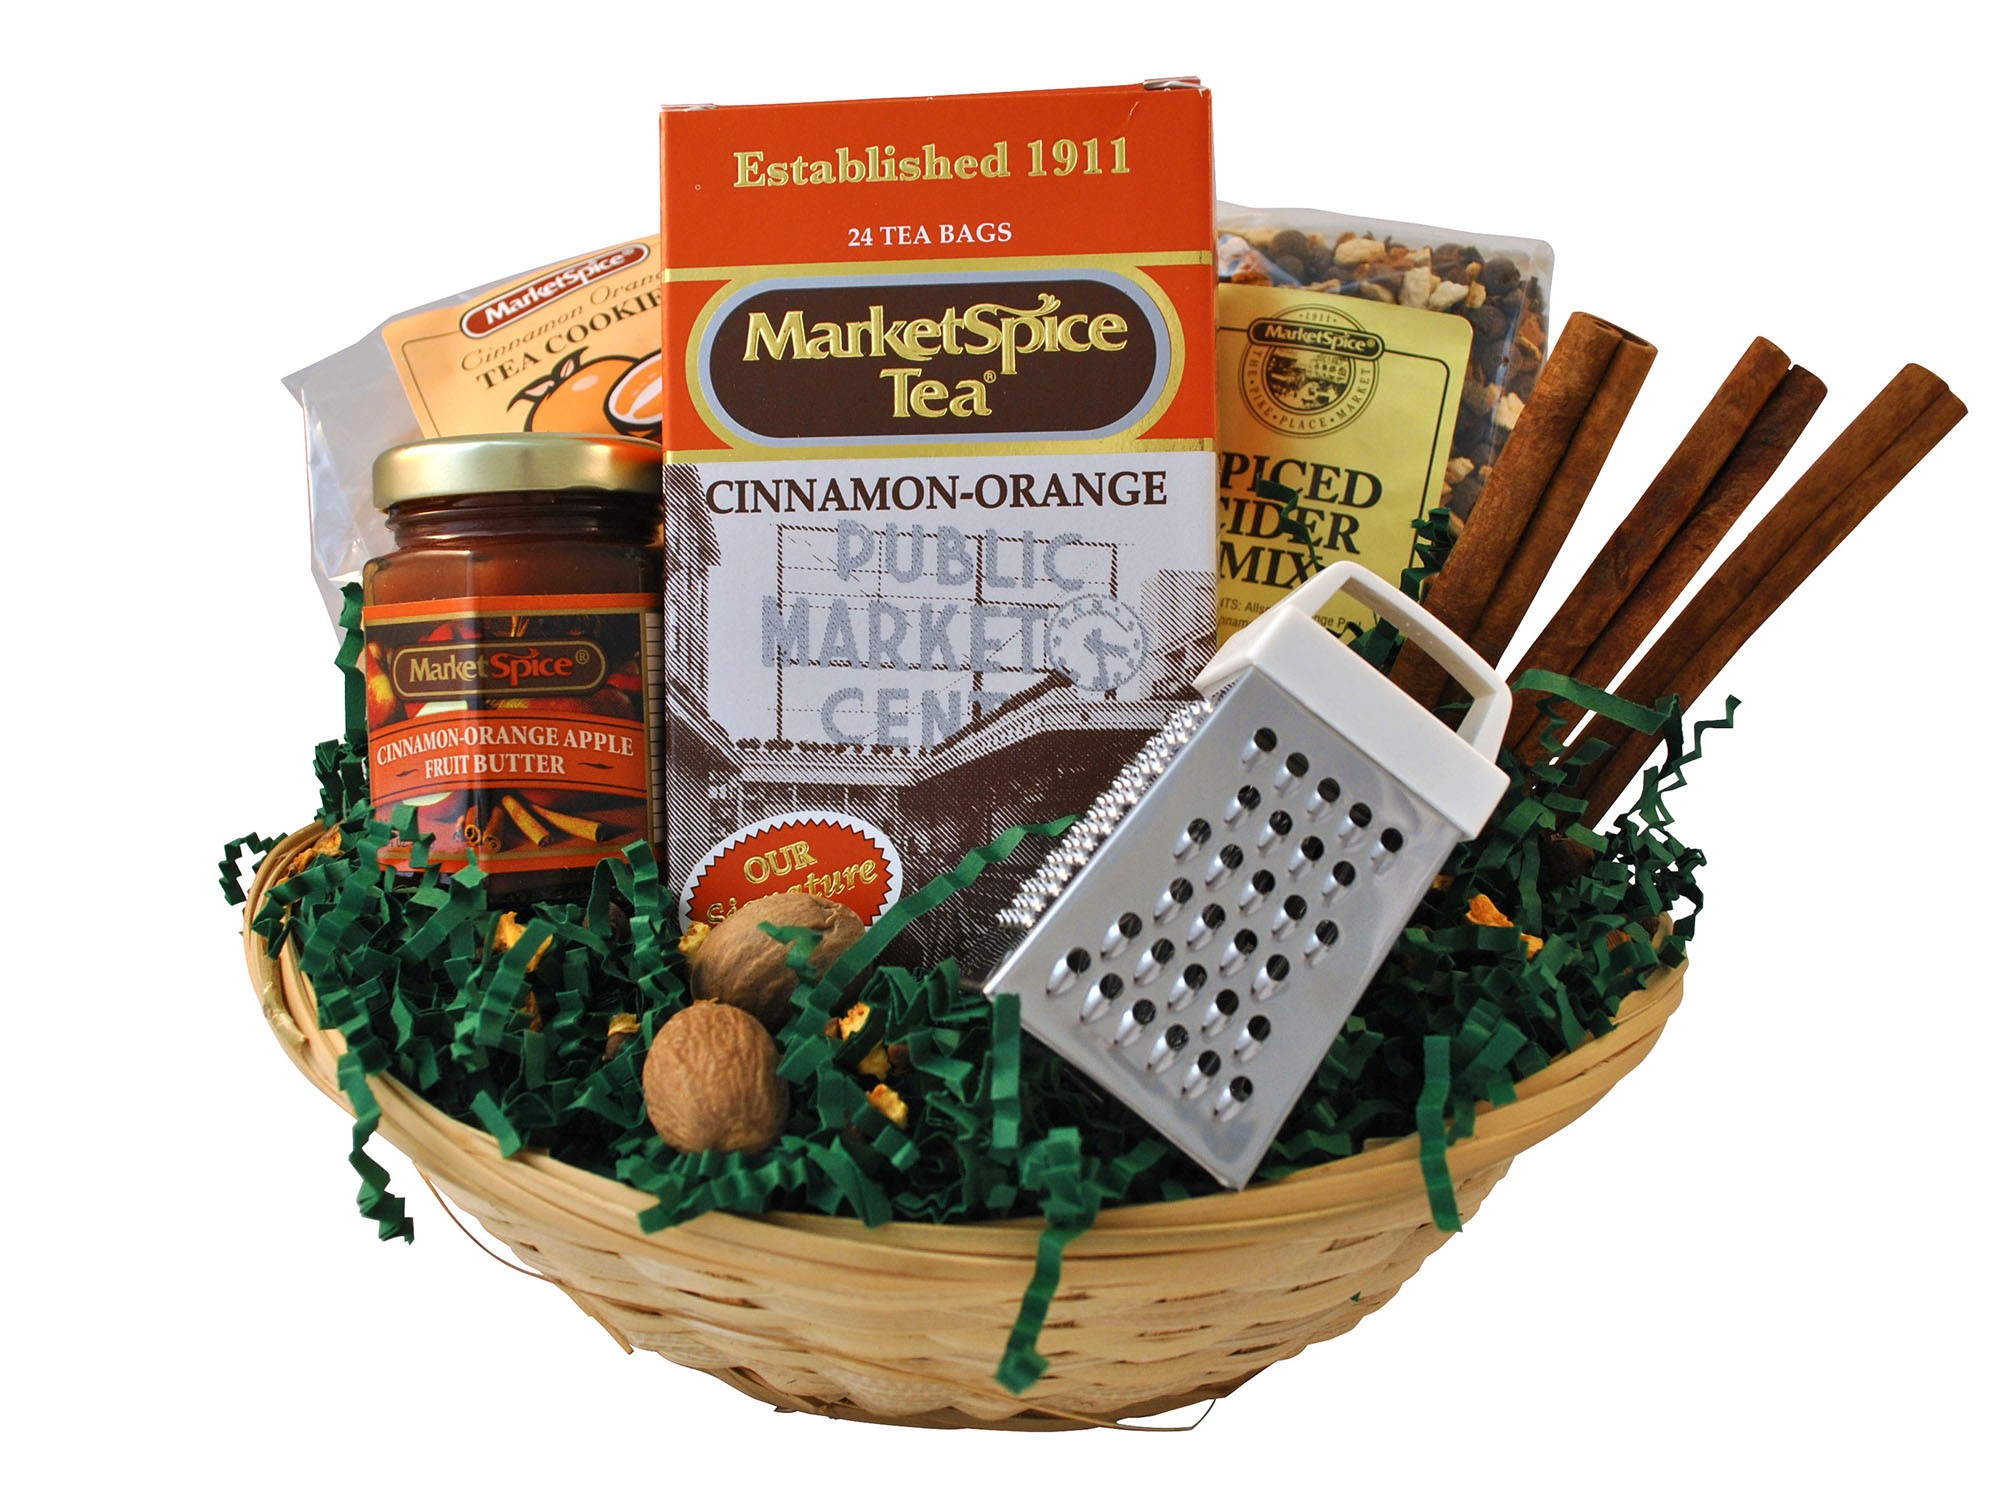 ALL Premade Gift Baskets - Marketspice